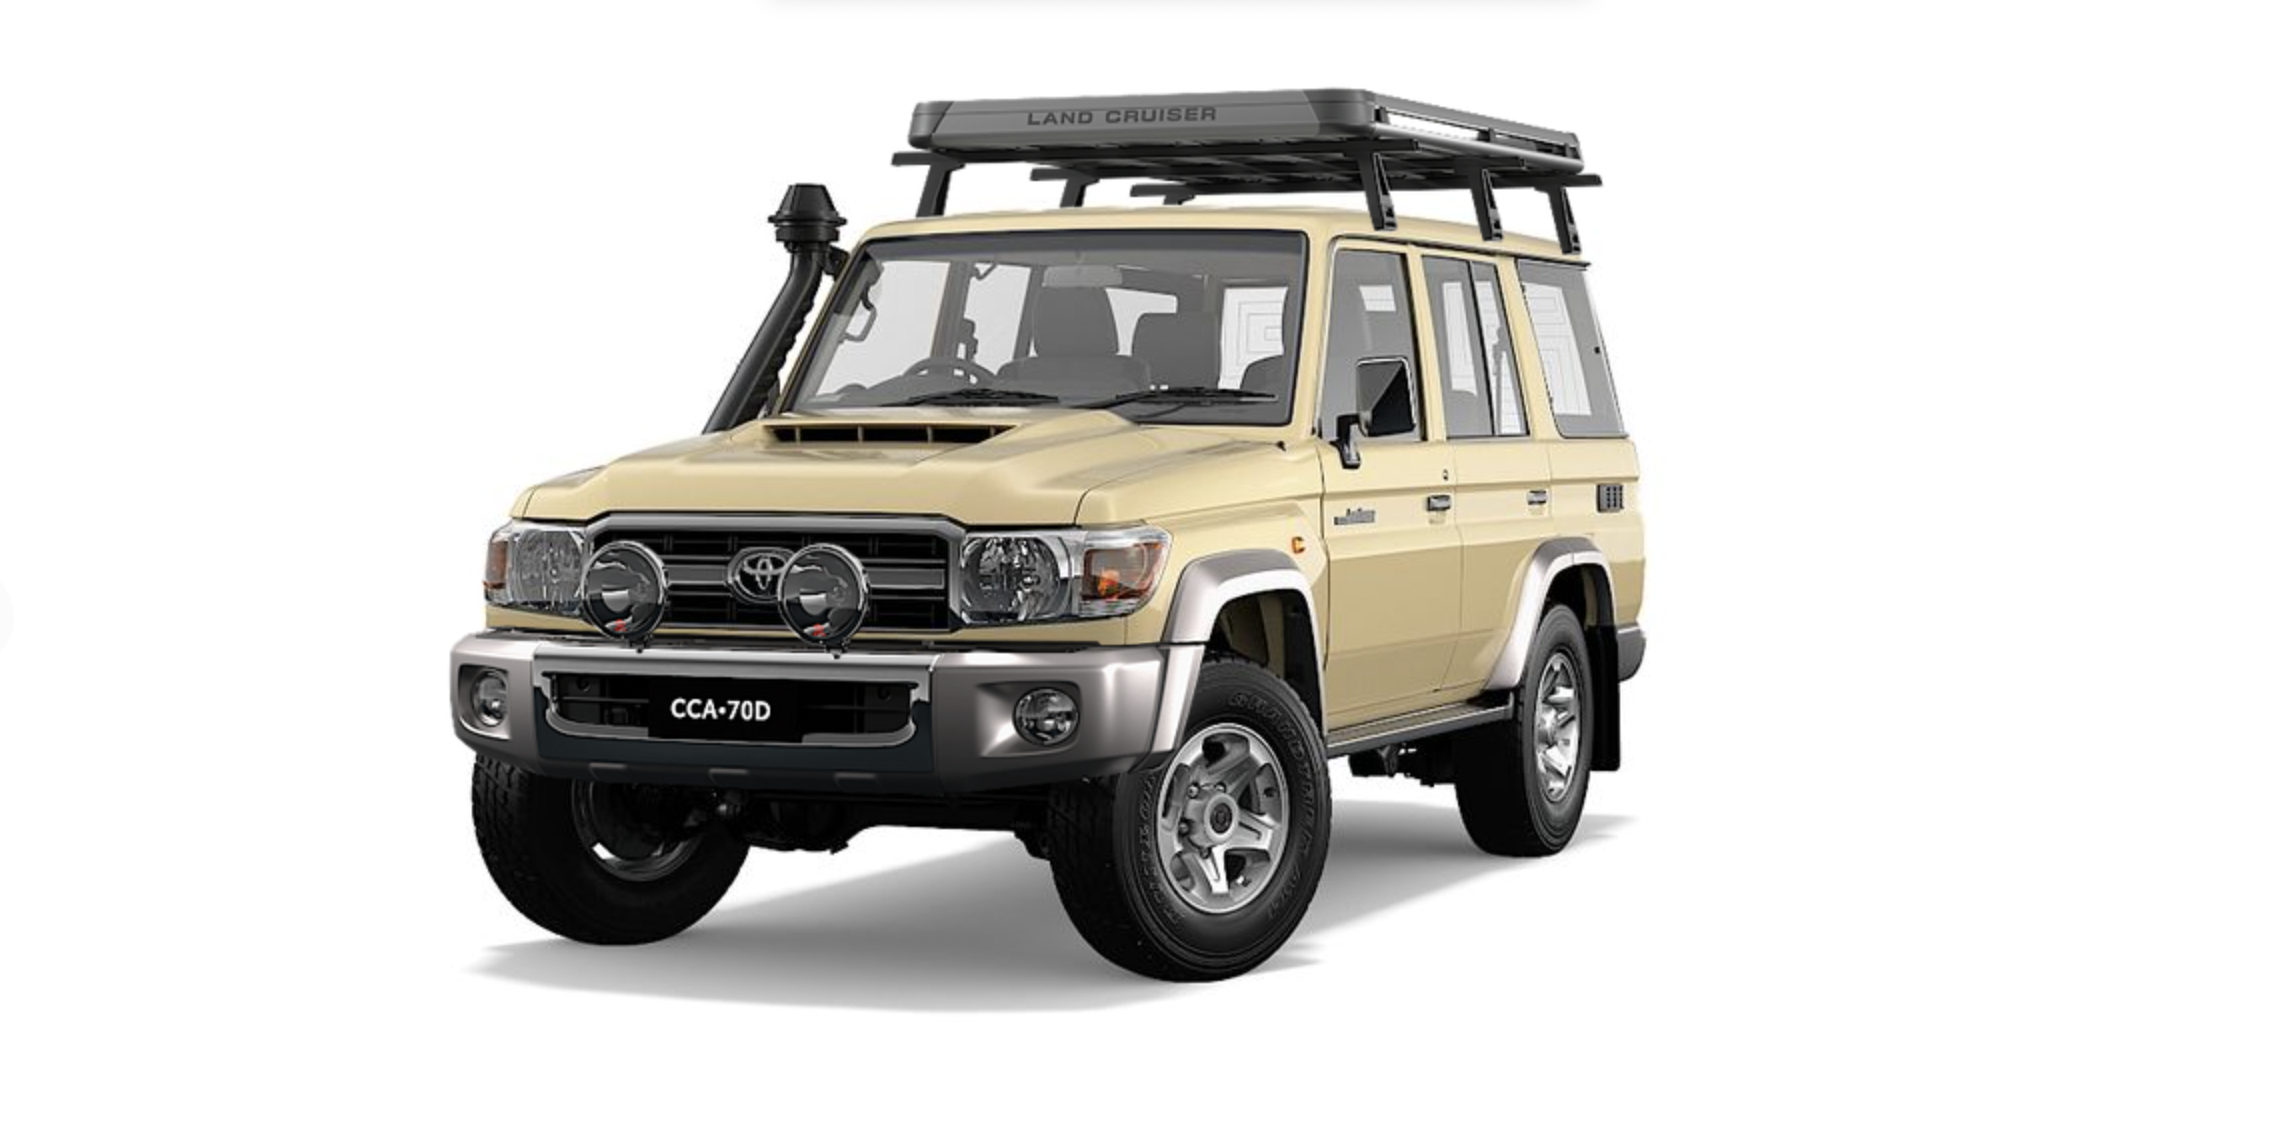 Toyota's rendering of a tan Land Cruiser 70 sold in Australia.